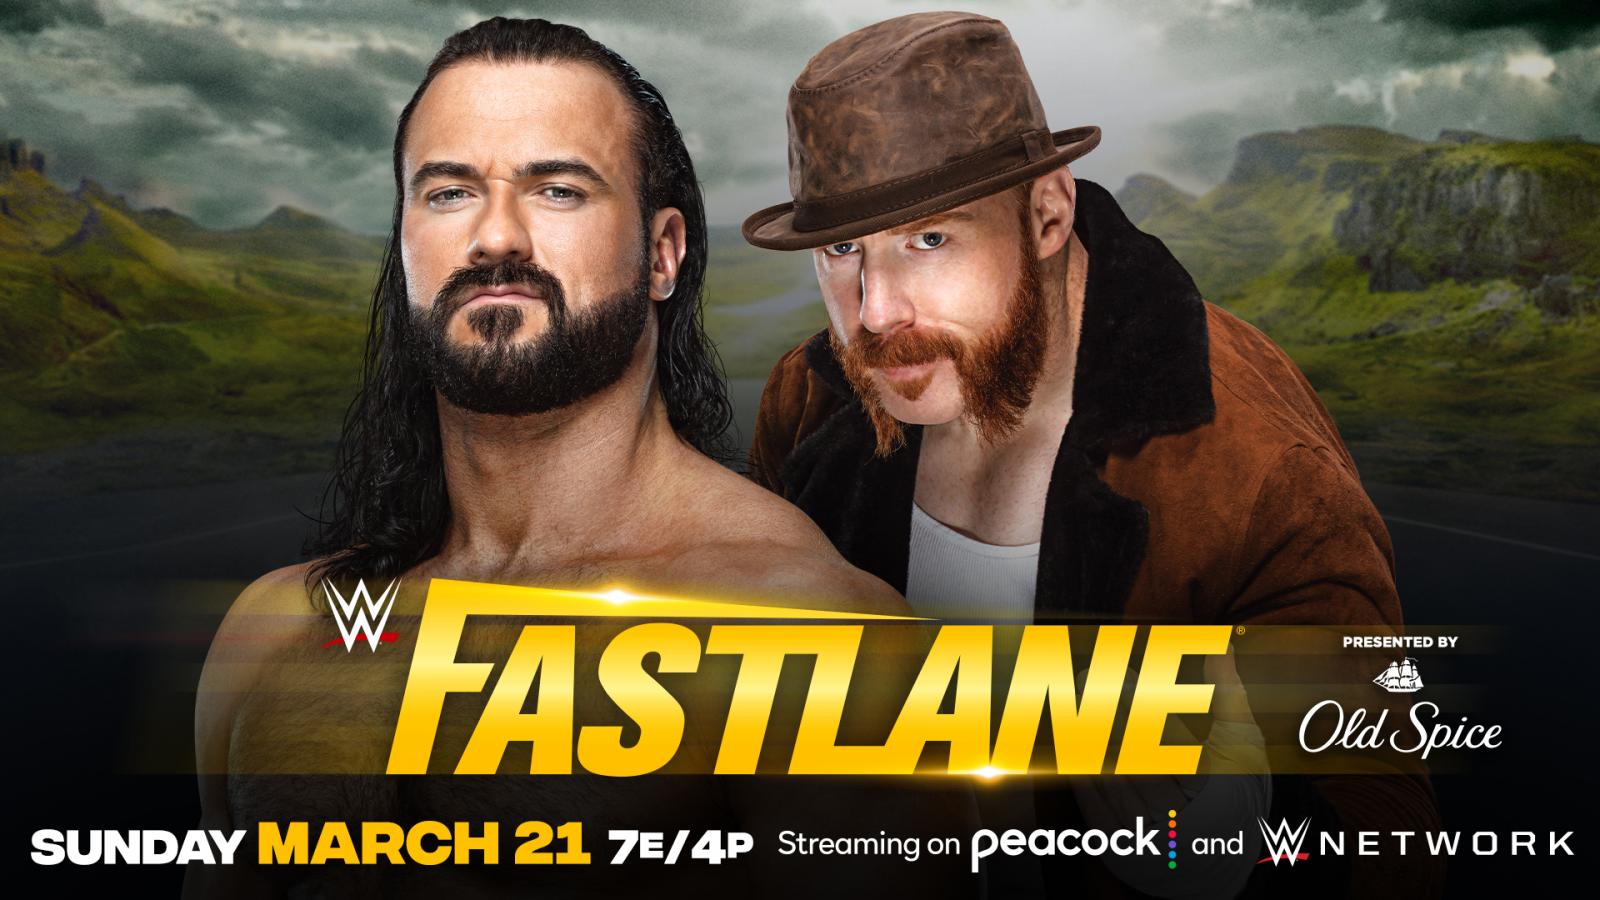 WWE Fastlane 2021: 3 New Matches Announced; Updated Match Card